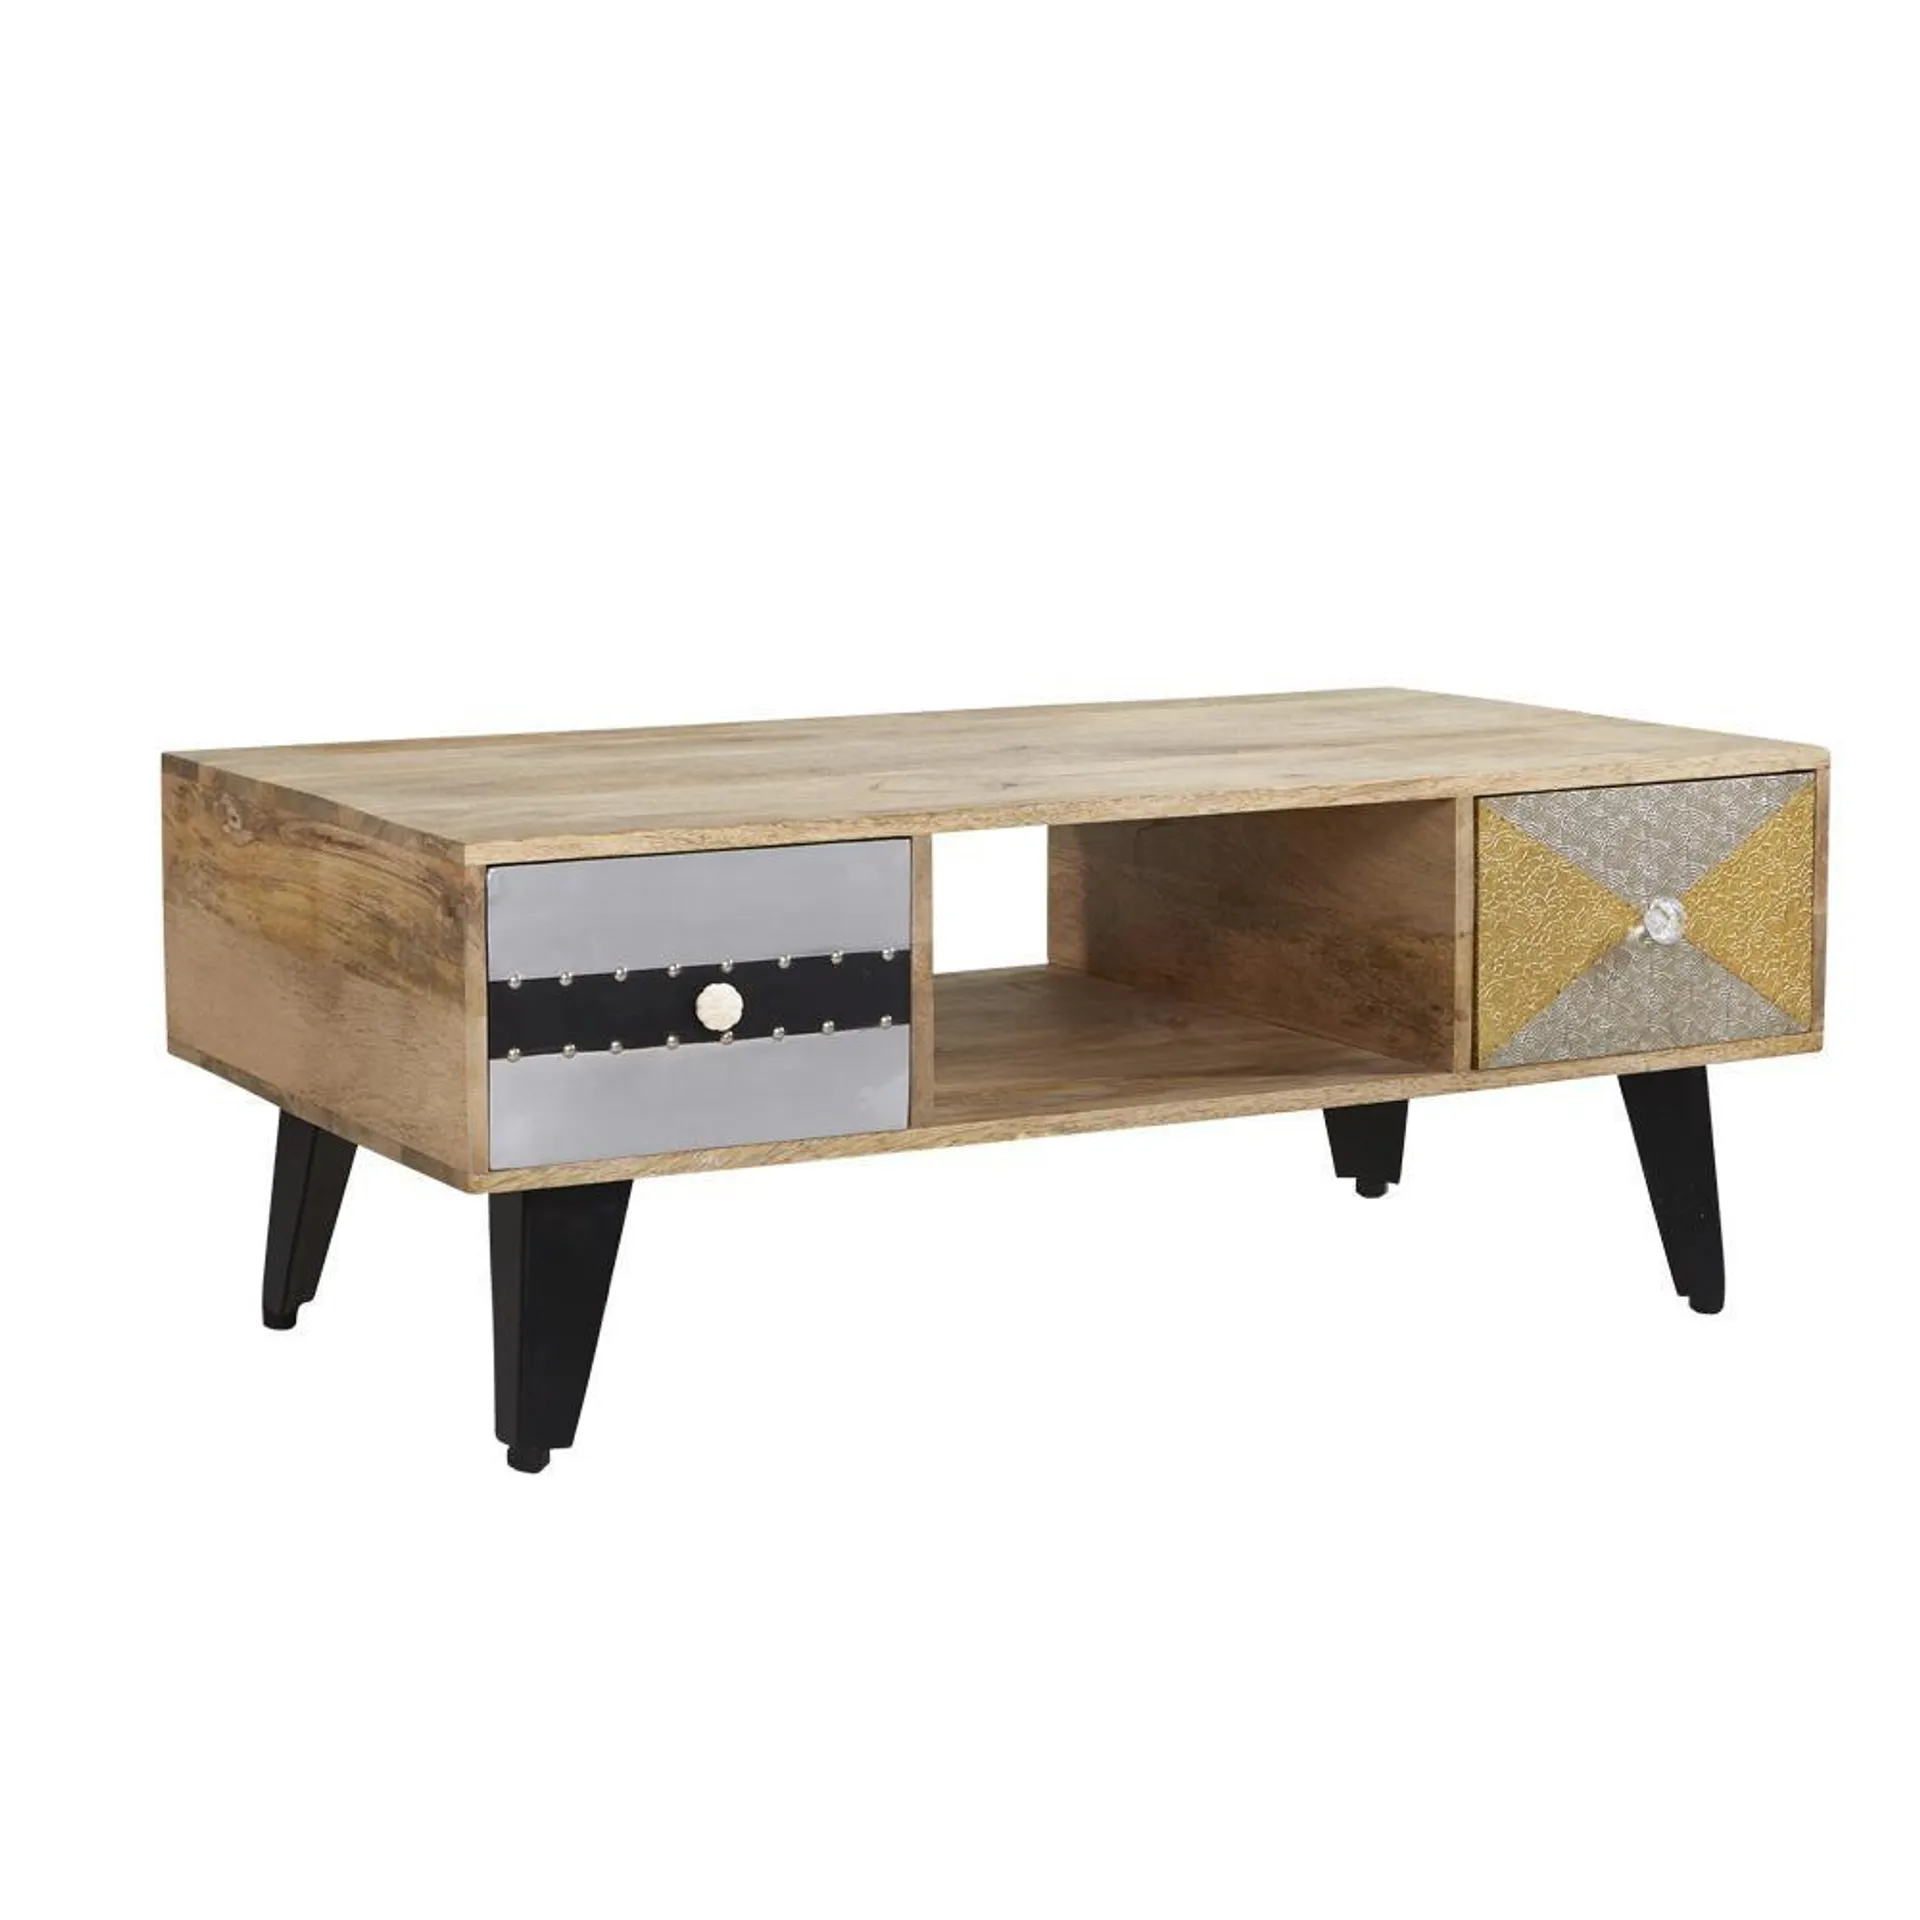 SORIO 2 DRAWER COFFEE TABLE